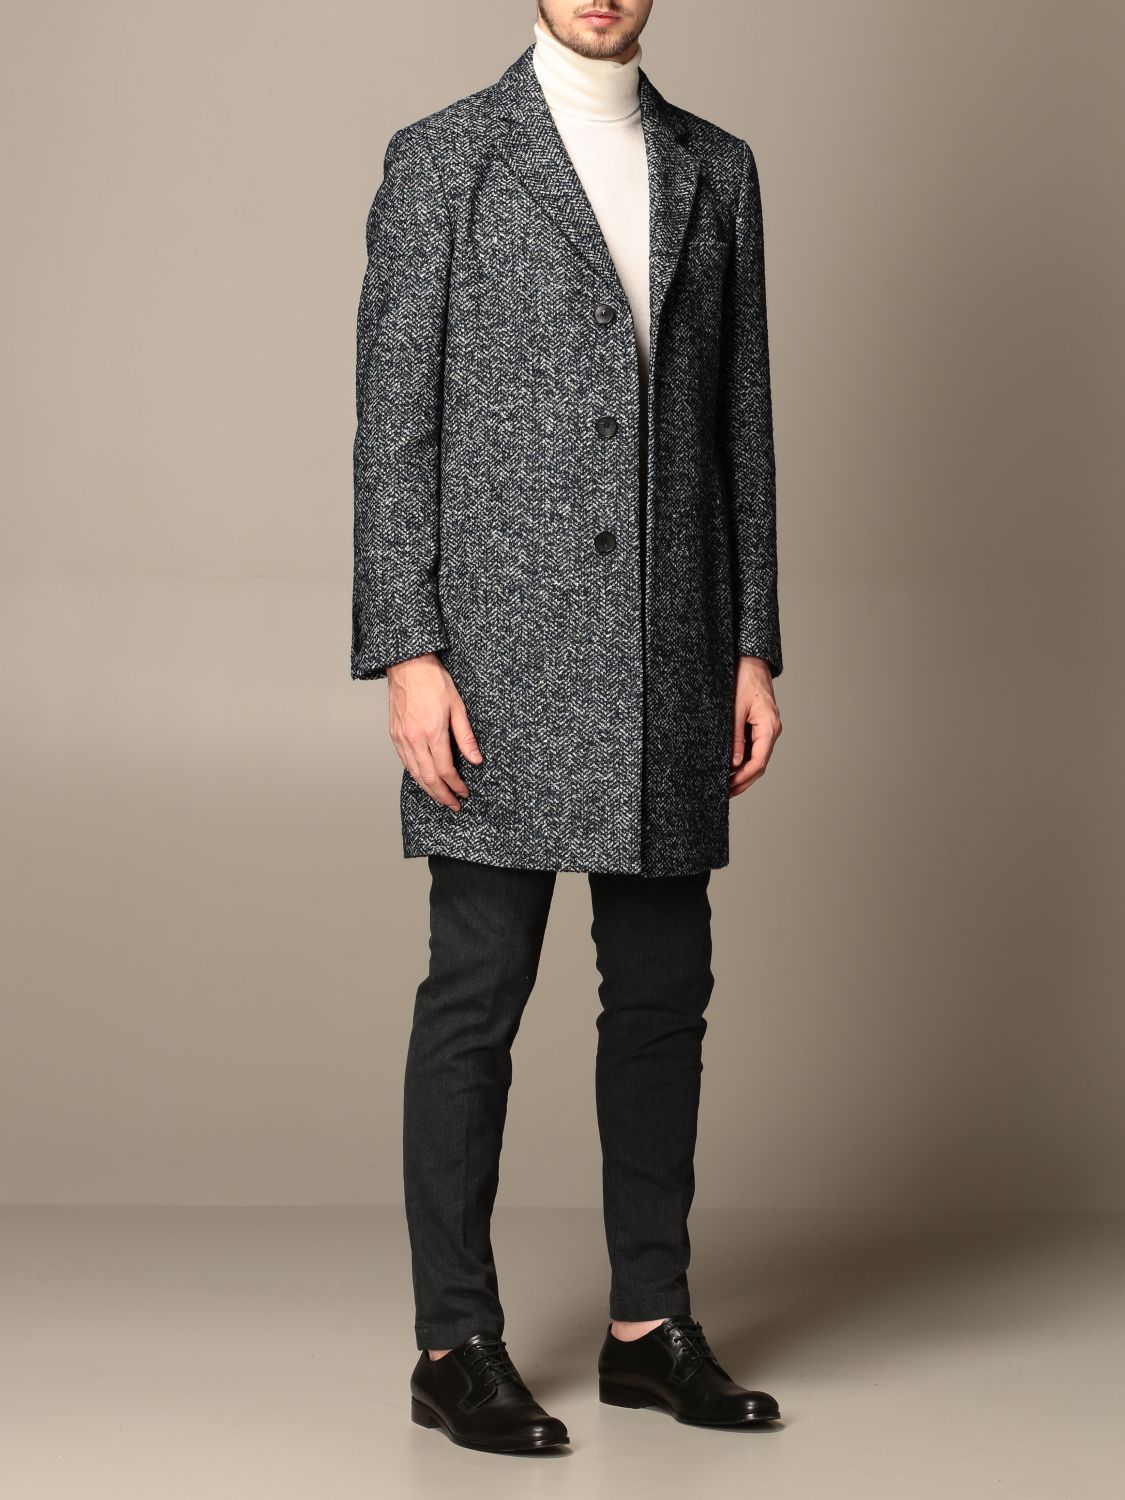 boss coat Cheaper Retail Price> Buy Clothing, Accessories and lifestyle products for & men -